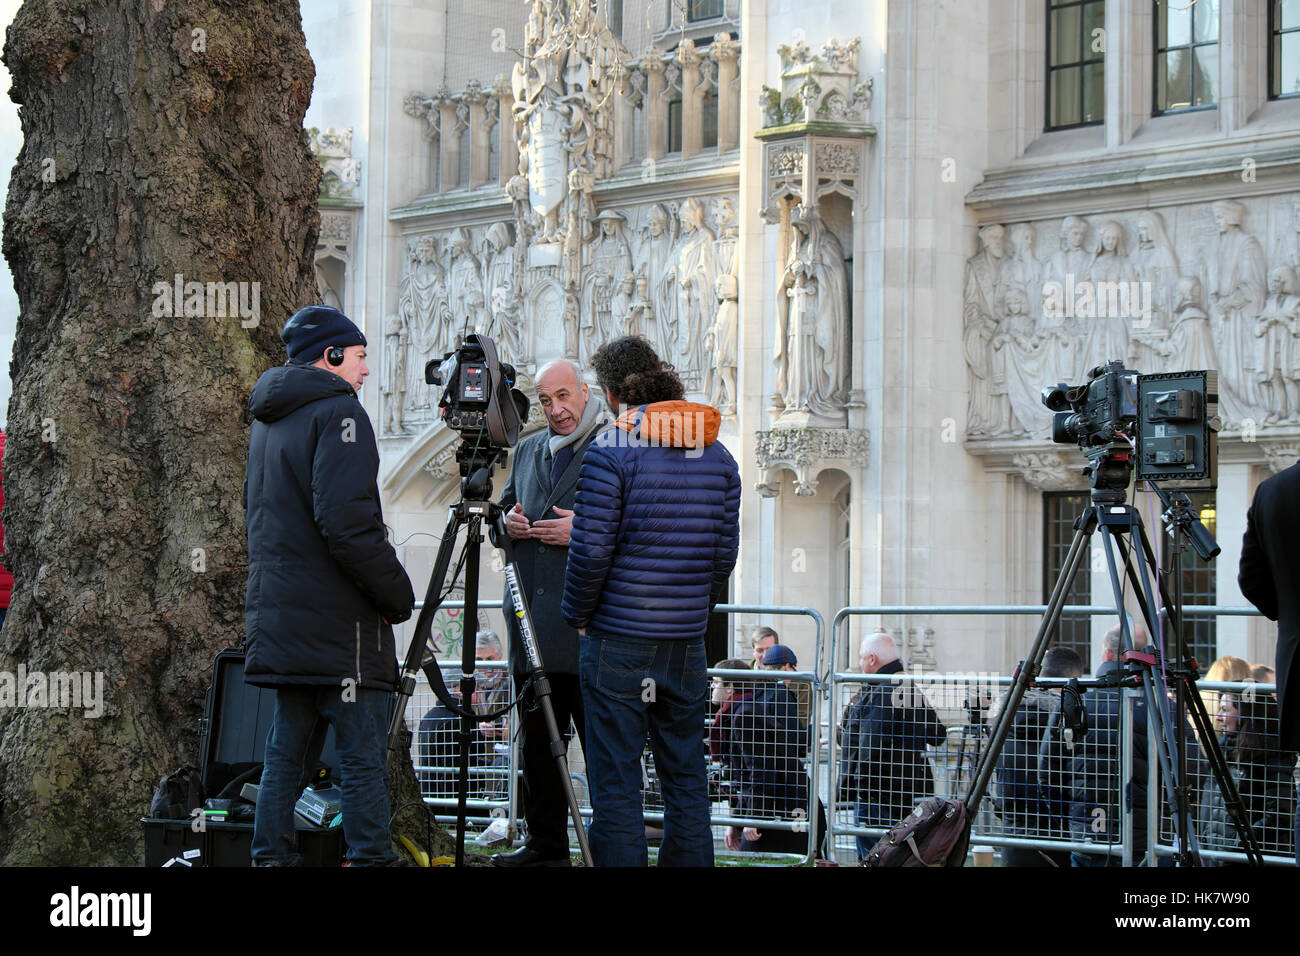 International press, news media, film crews and journalists at Supreme Court after Article 50 ruling in favour of Parliament, London UK   KATHY DEWITT Stock Photo